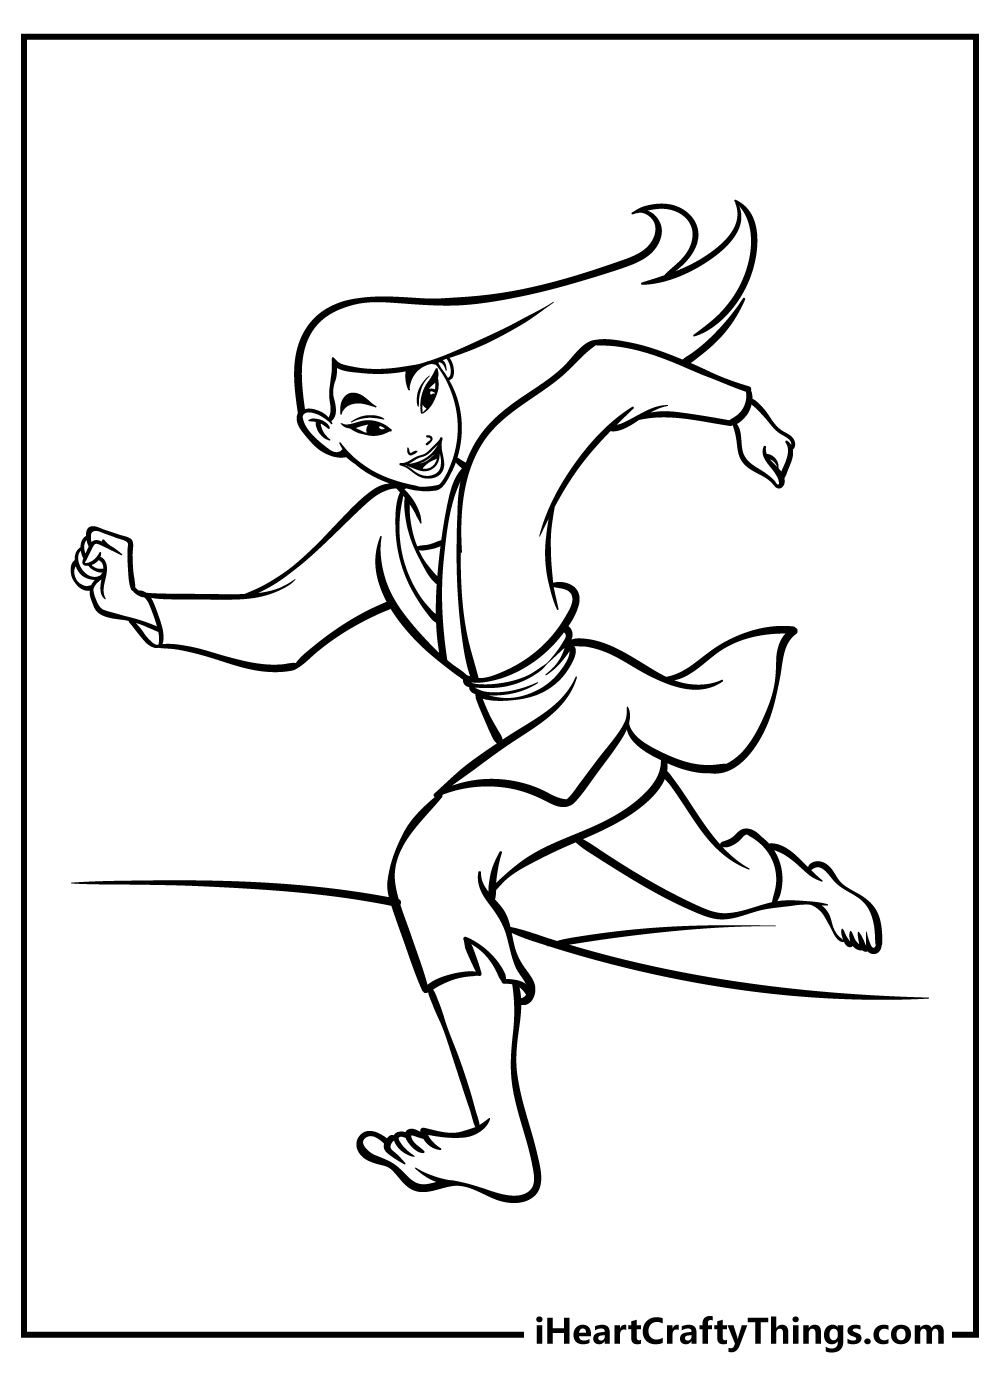 Mulan Coloring Pages for kids free download